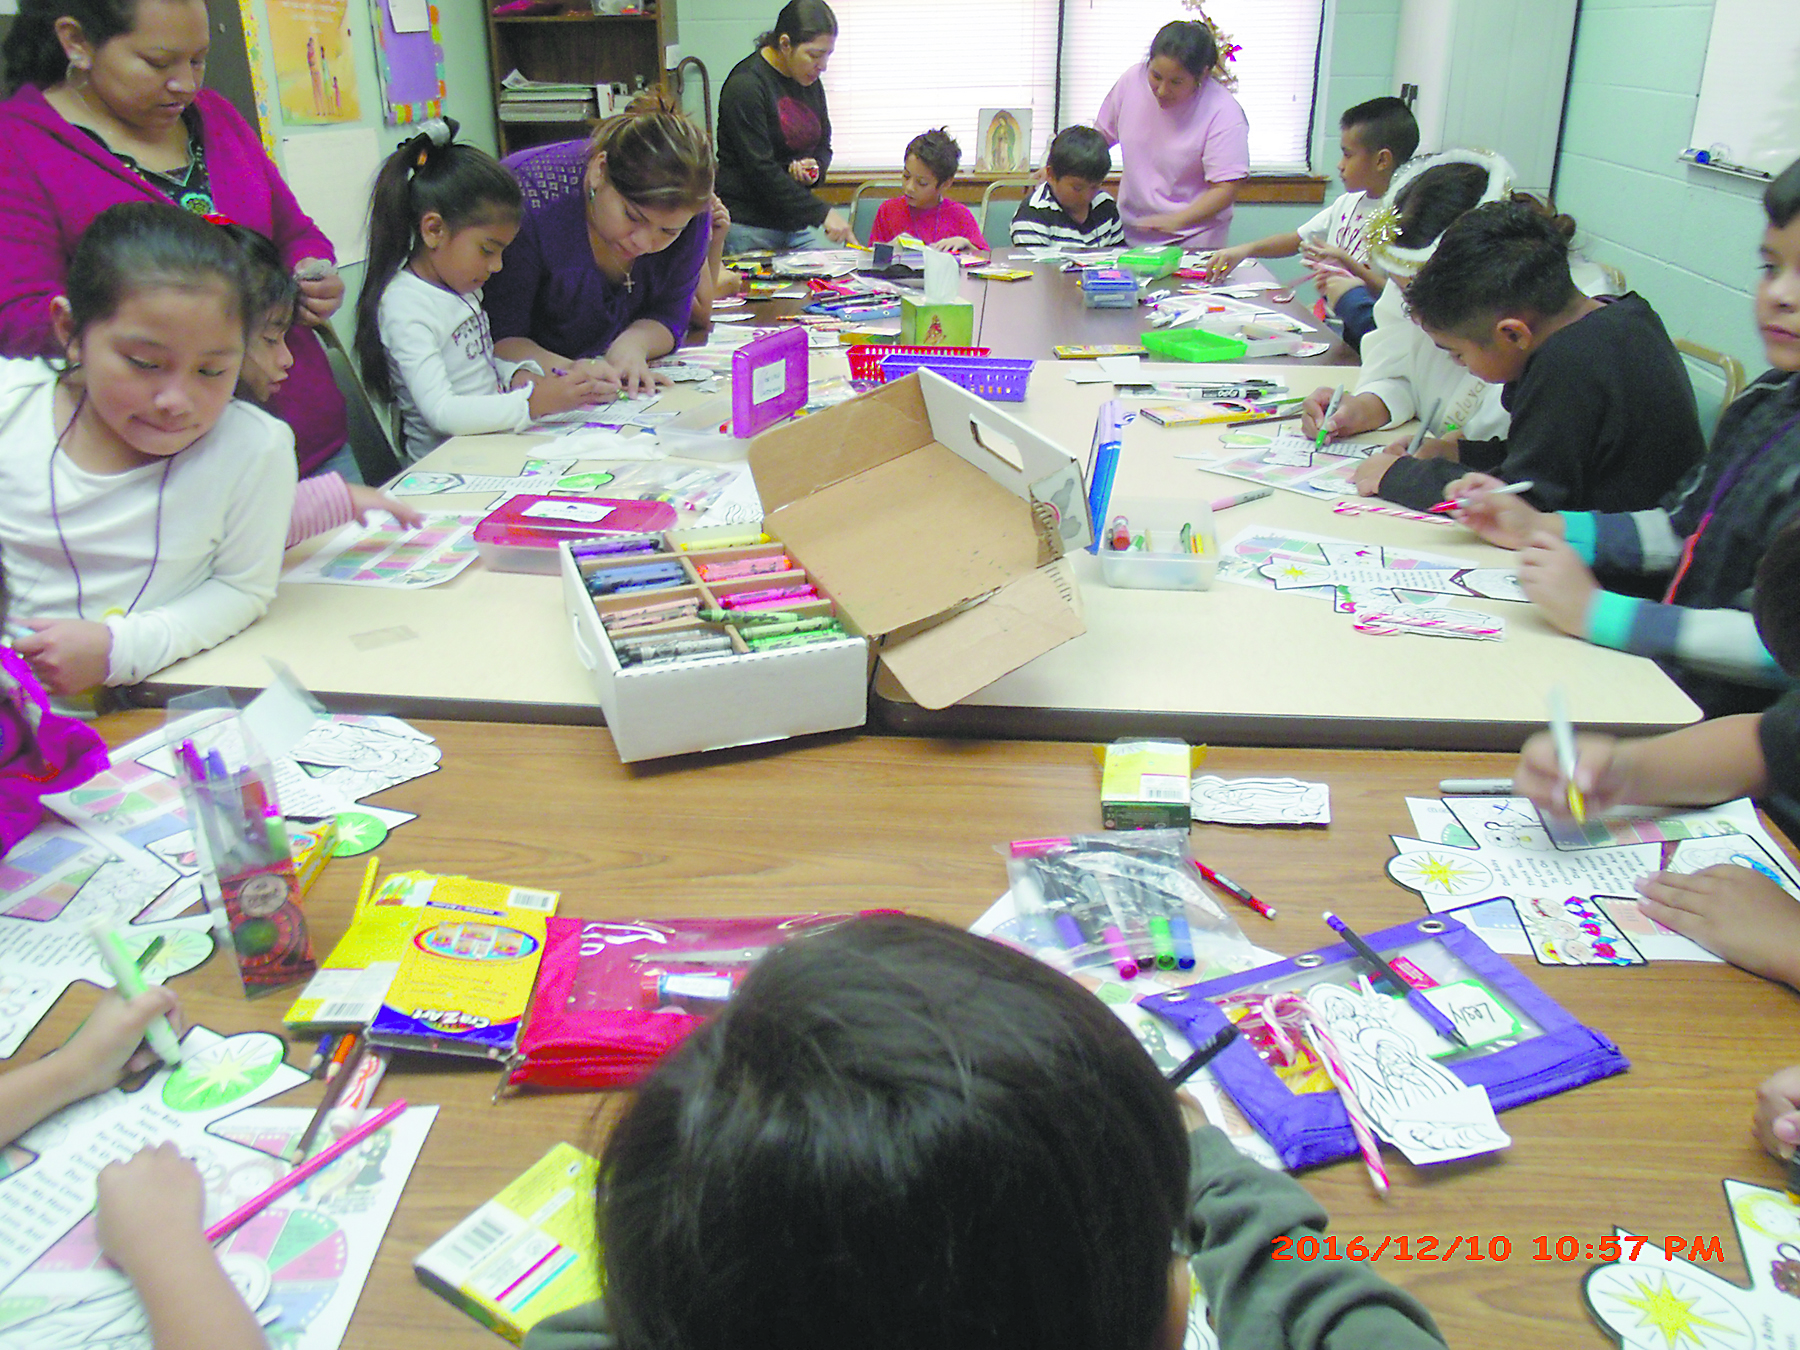 CORINTH – St. James Parish children work in art projects during an Advent retreat on Saturday, Dec. 10. (Photo by Luis Rosales)